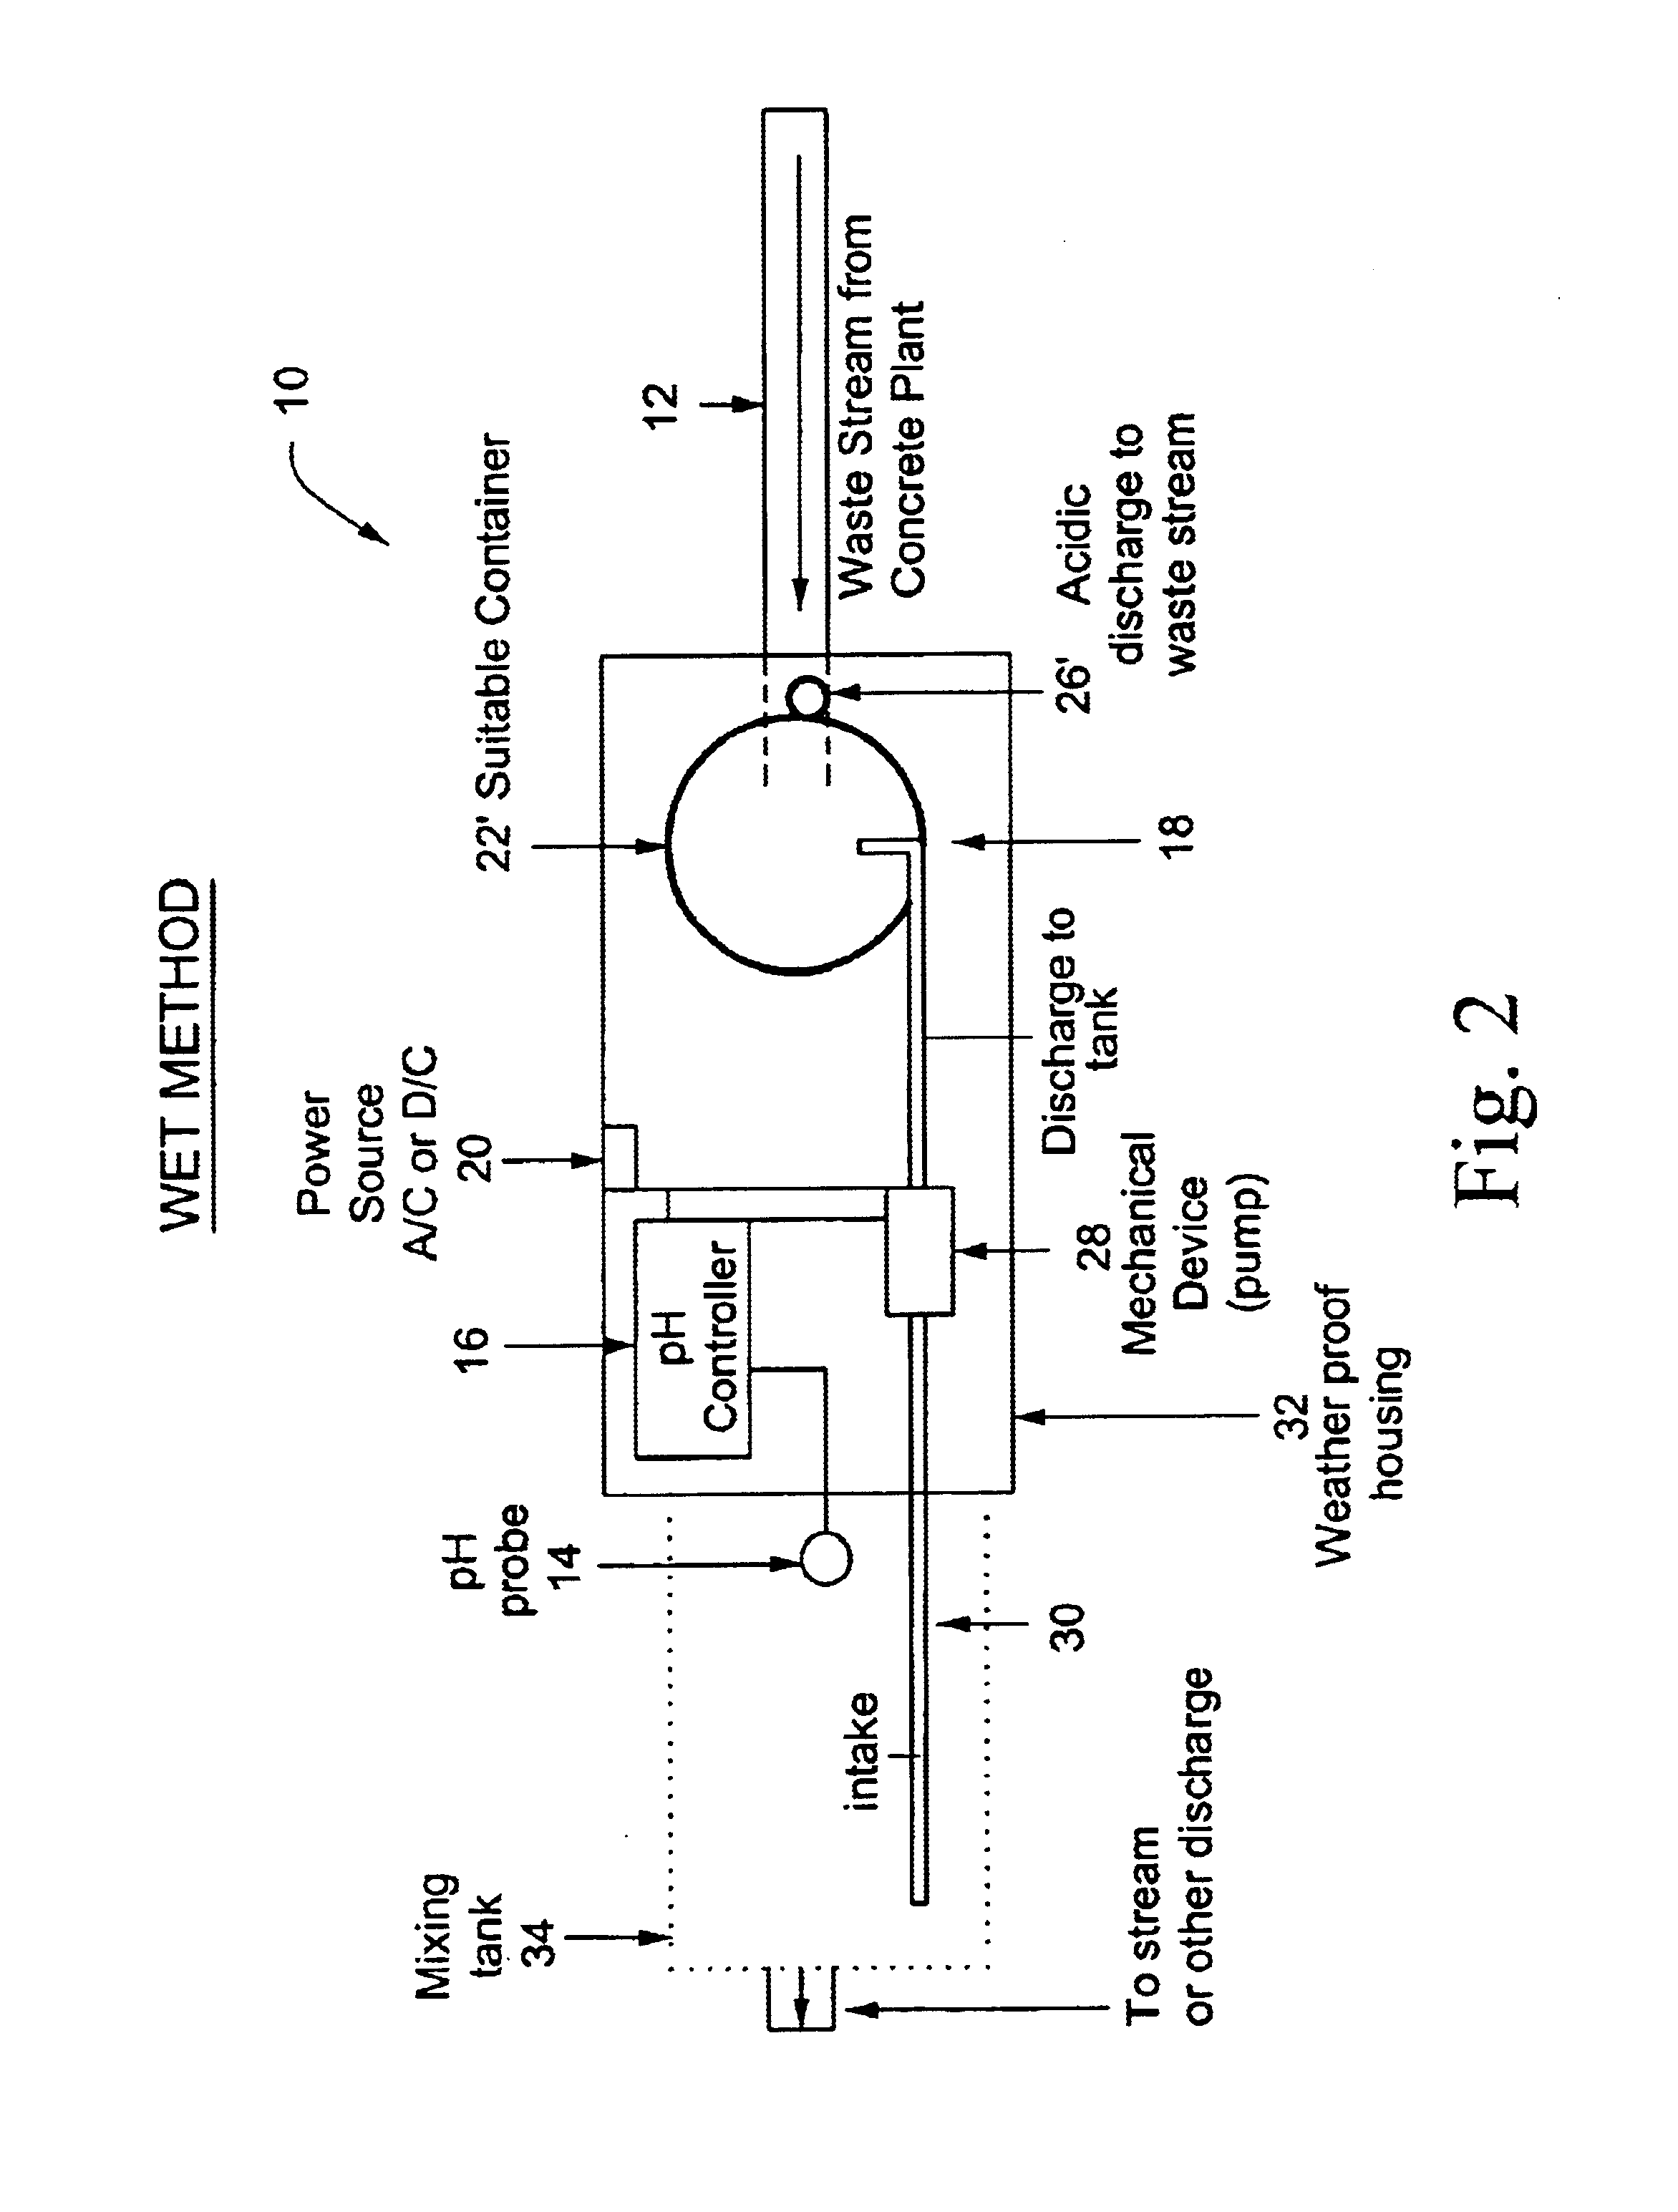 PH reduction system and method for concrete plant discharge